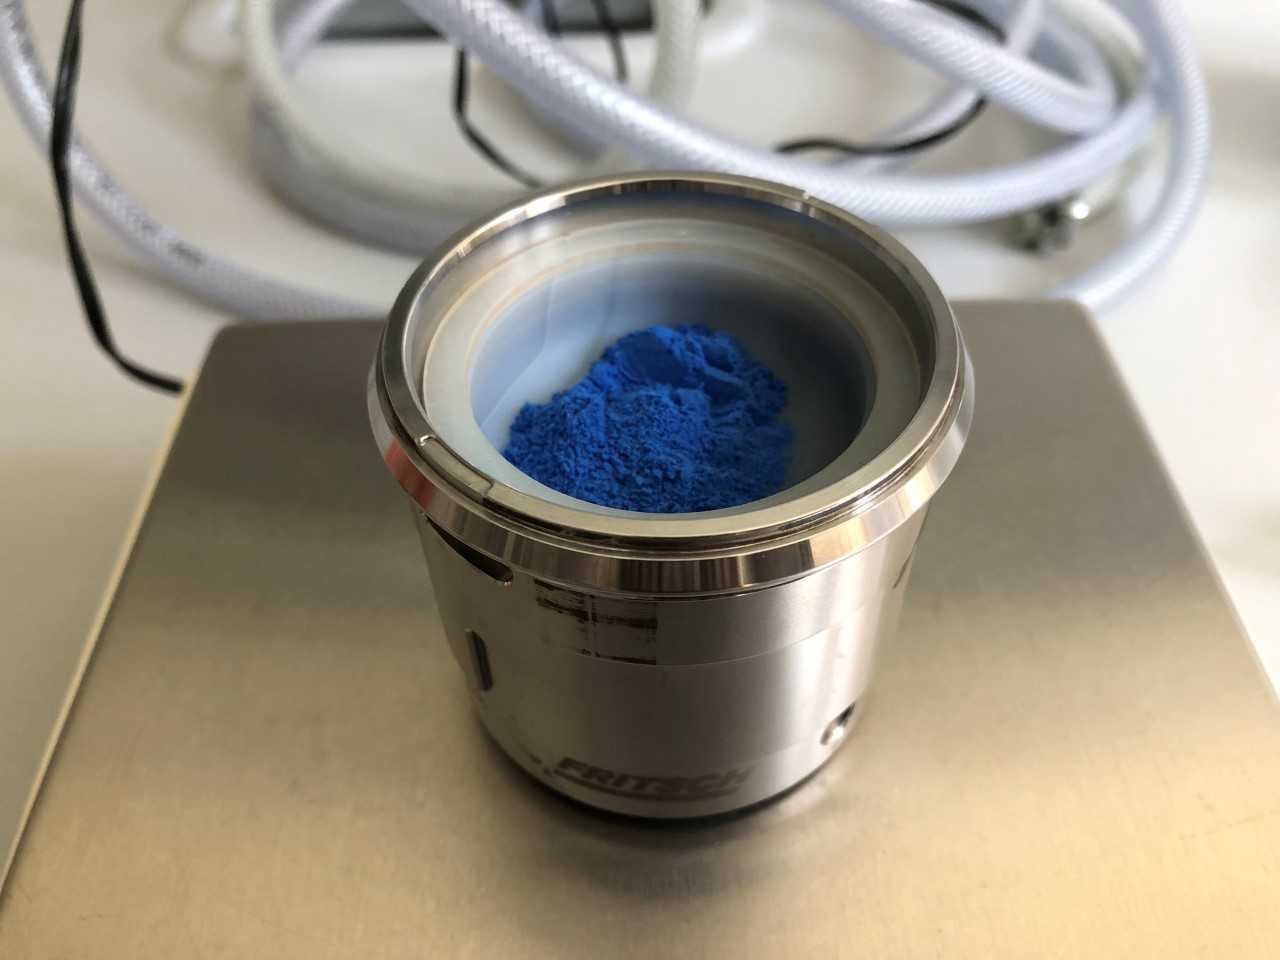 Egyptian blue: the researchers obtained the nanosheets from this powder.